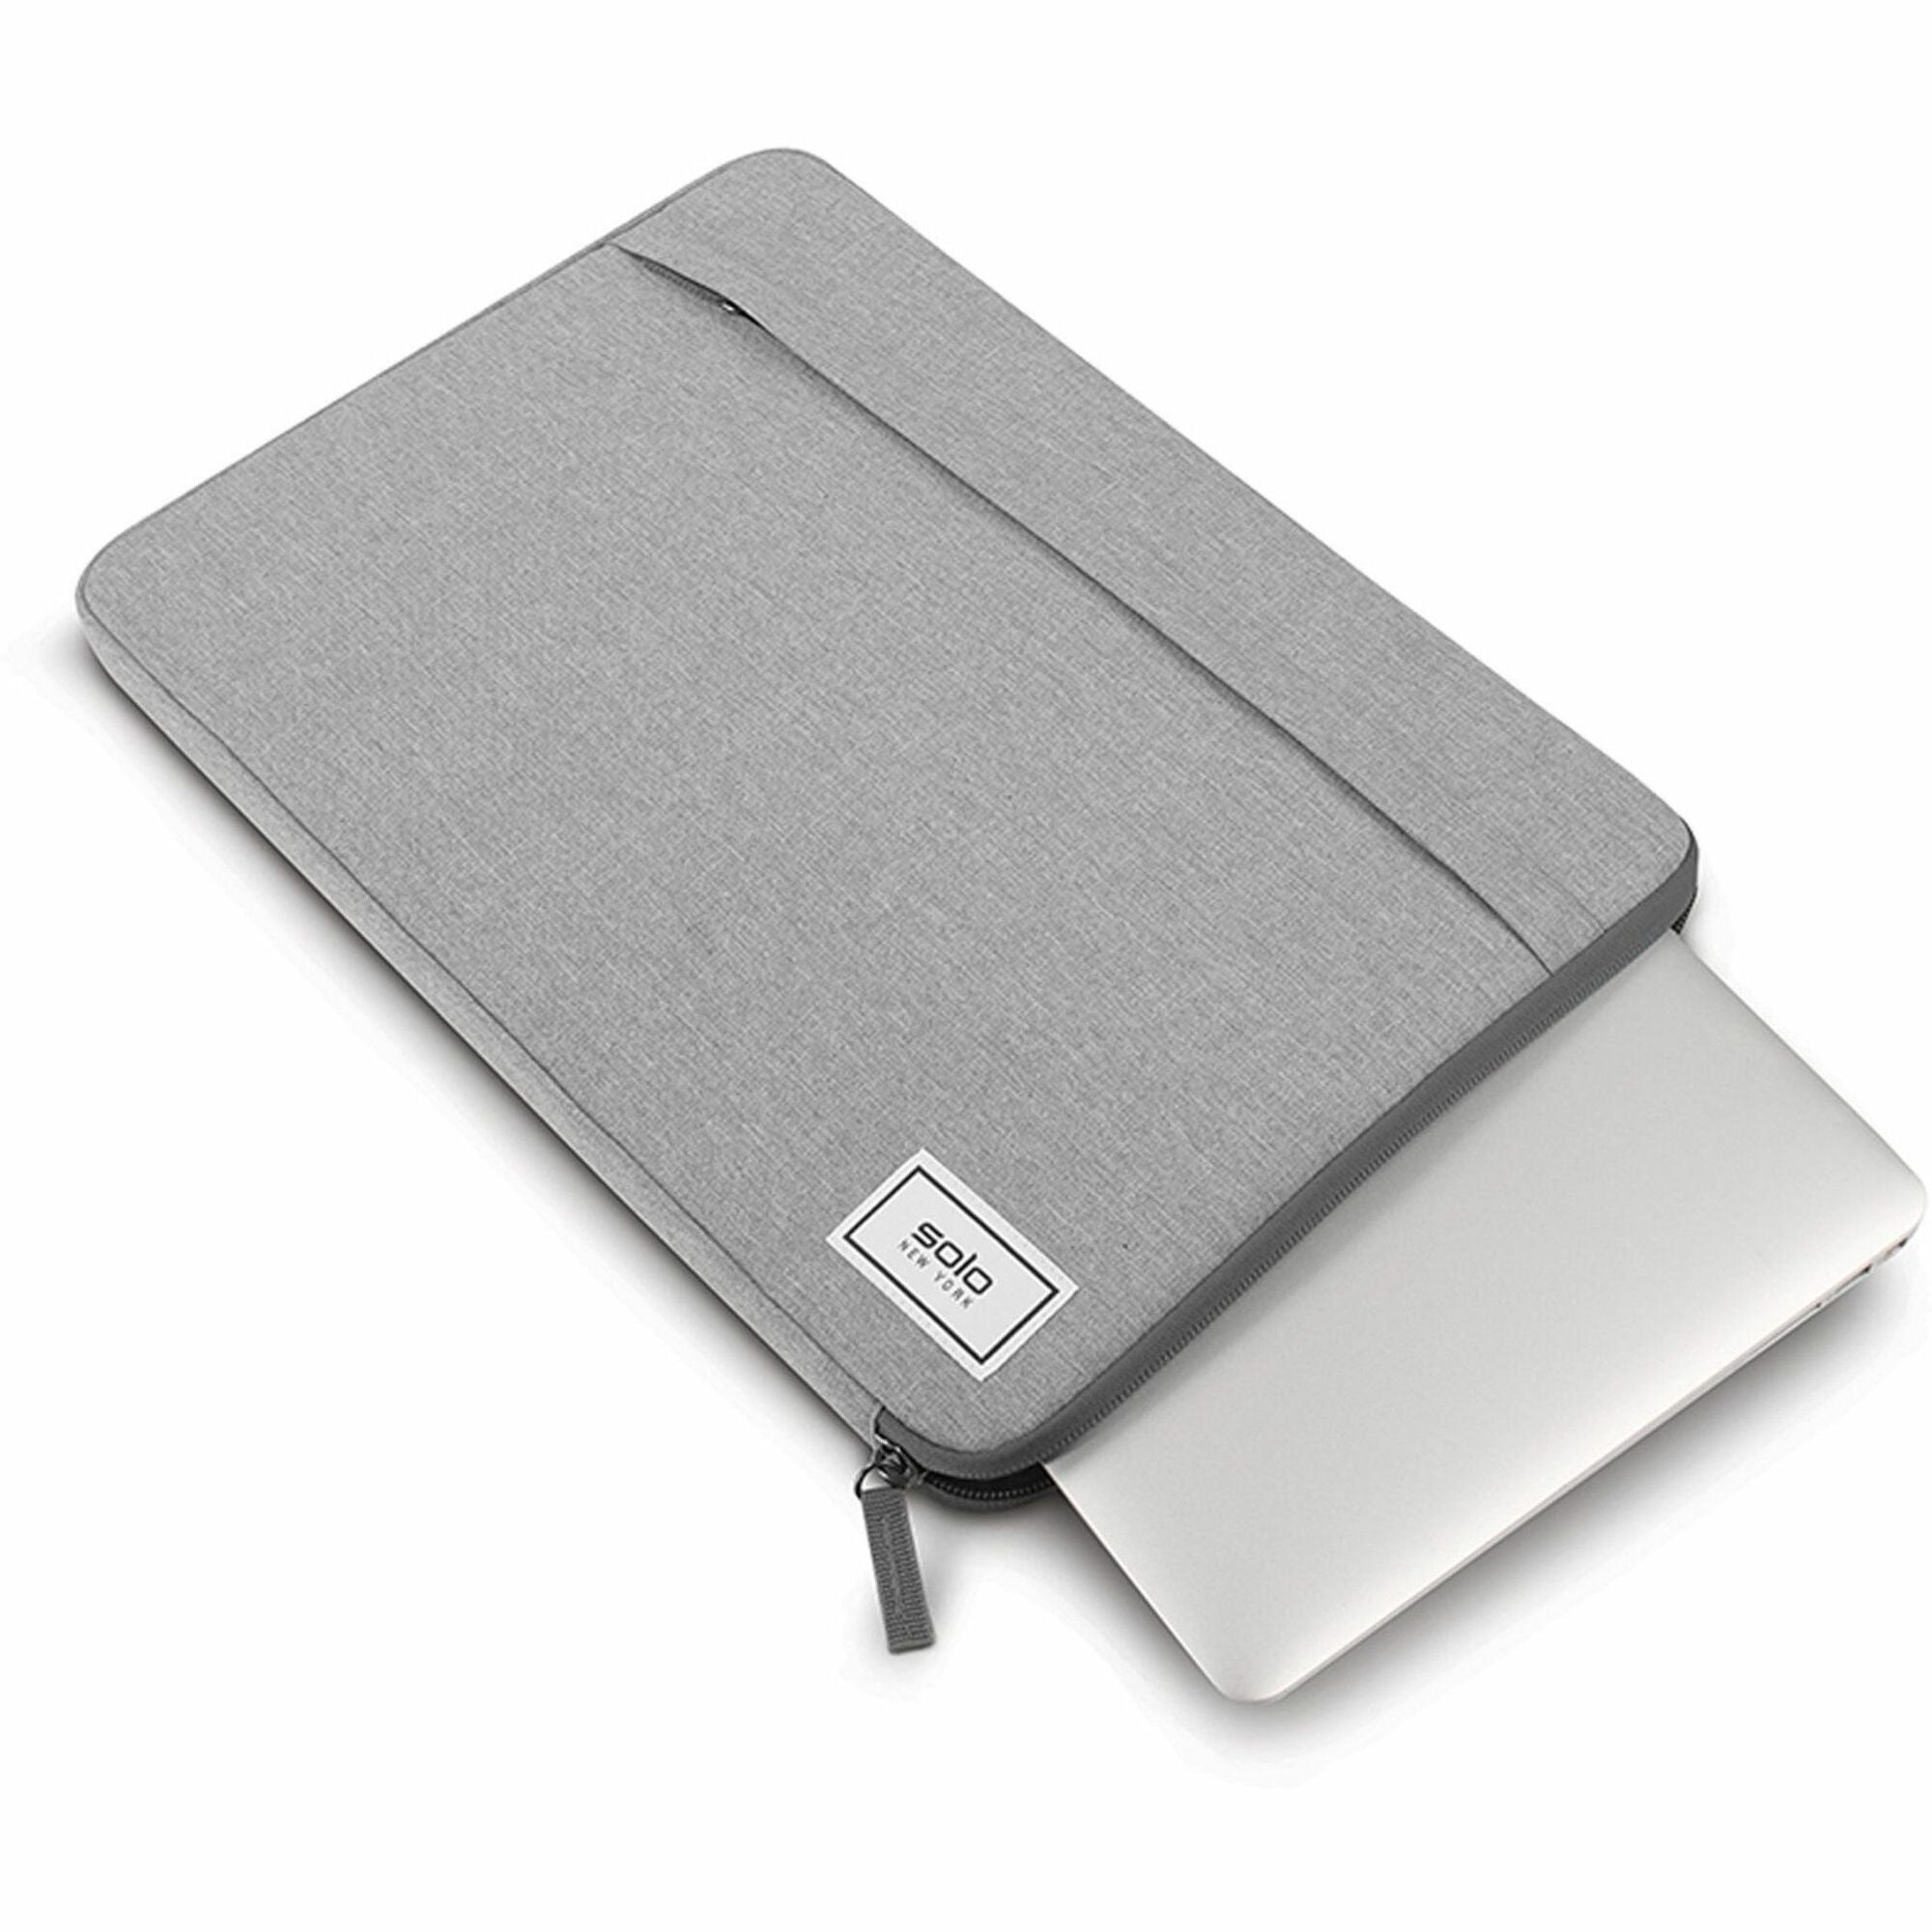 solo-focus-carrying-case-sleeve-for-156-notebook-gray-bump-resistant-damage-resistant-113-height-x-163-width-x-1-depth-1-each_uslubn10510 - 1